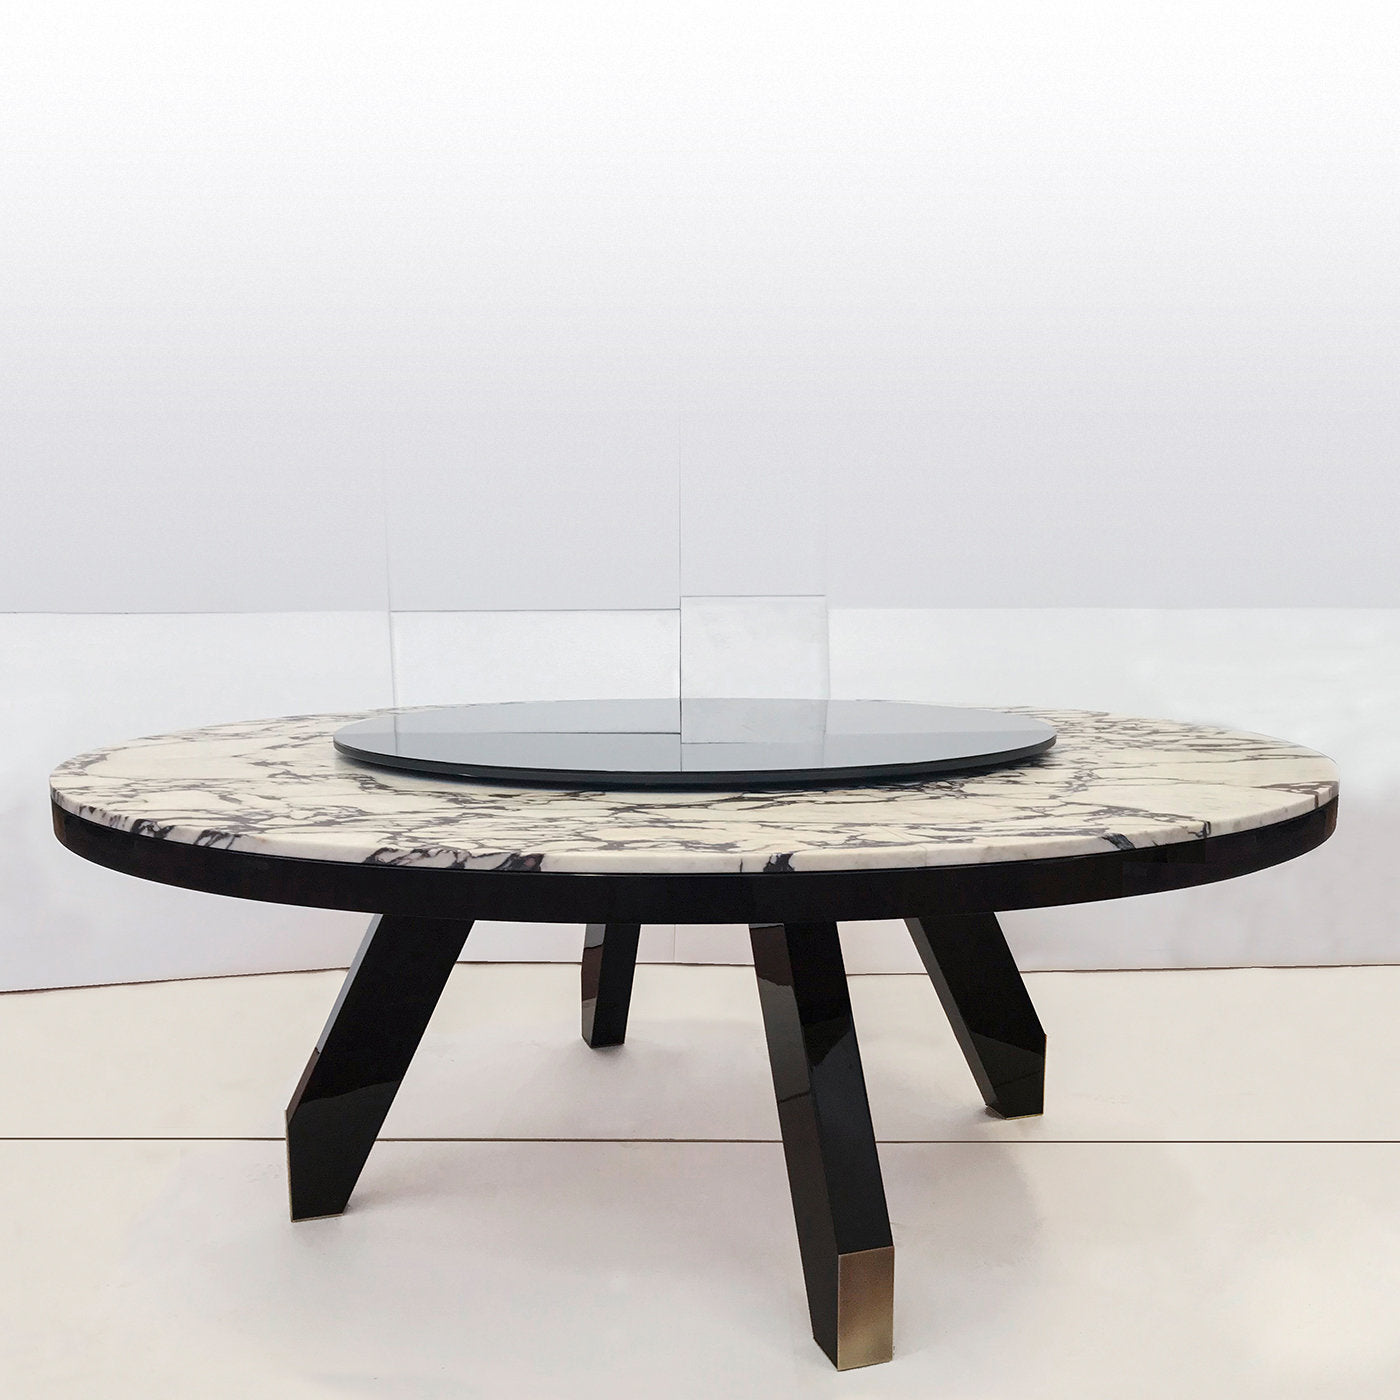 Boscolo Table with Lazy Susan by Bosco Fair - Alternative view 2